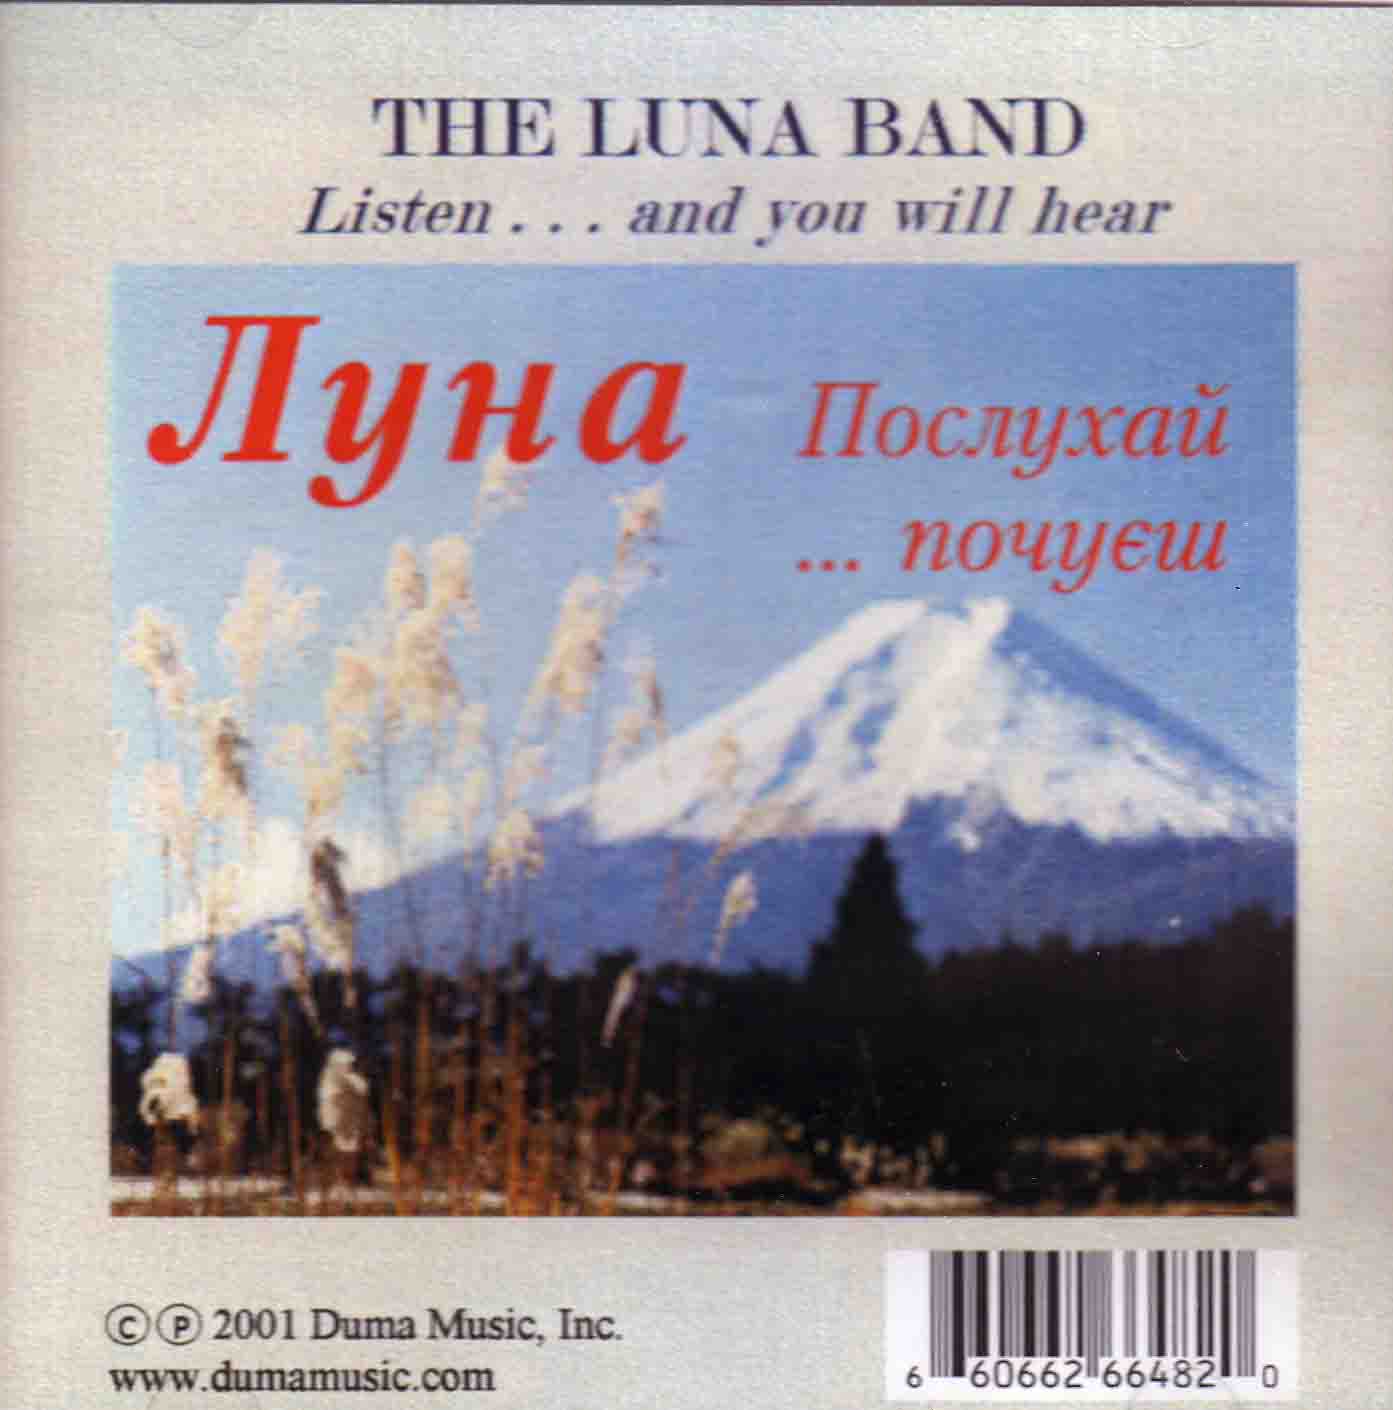 The Luna Band      Listen...and you will hear